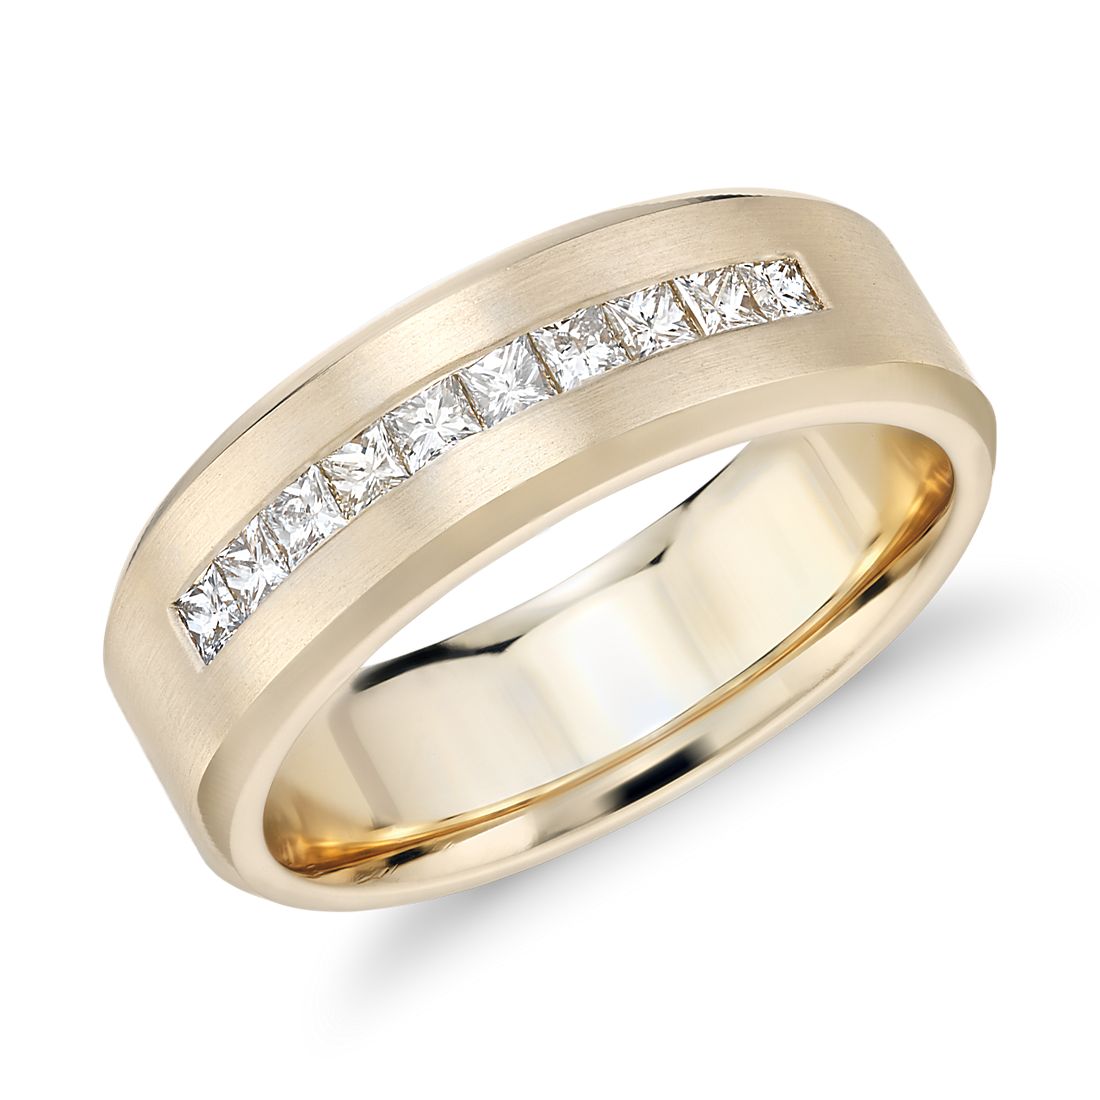 1/2 CT Princess Diamond Wedding Band in 14K Gold Channel